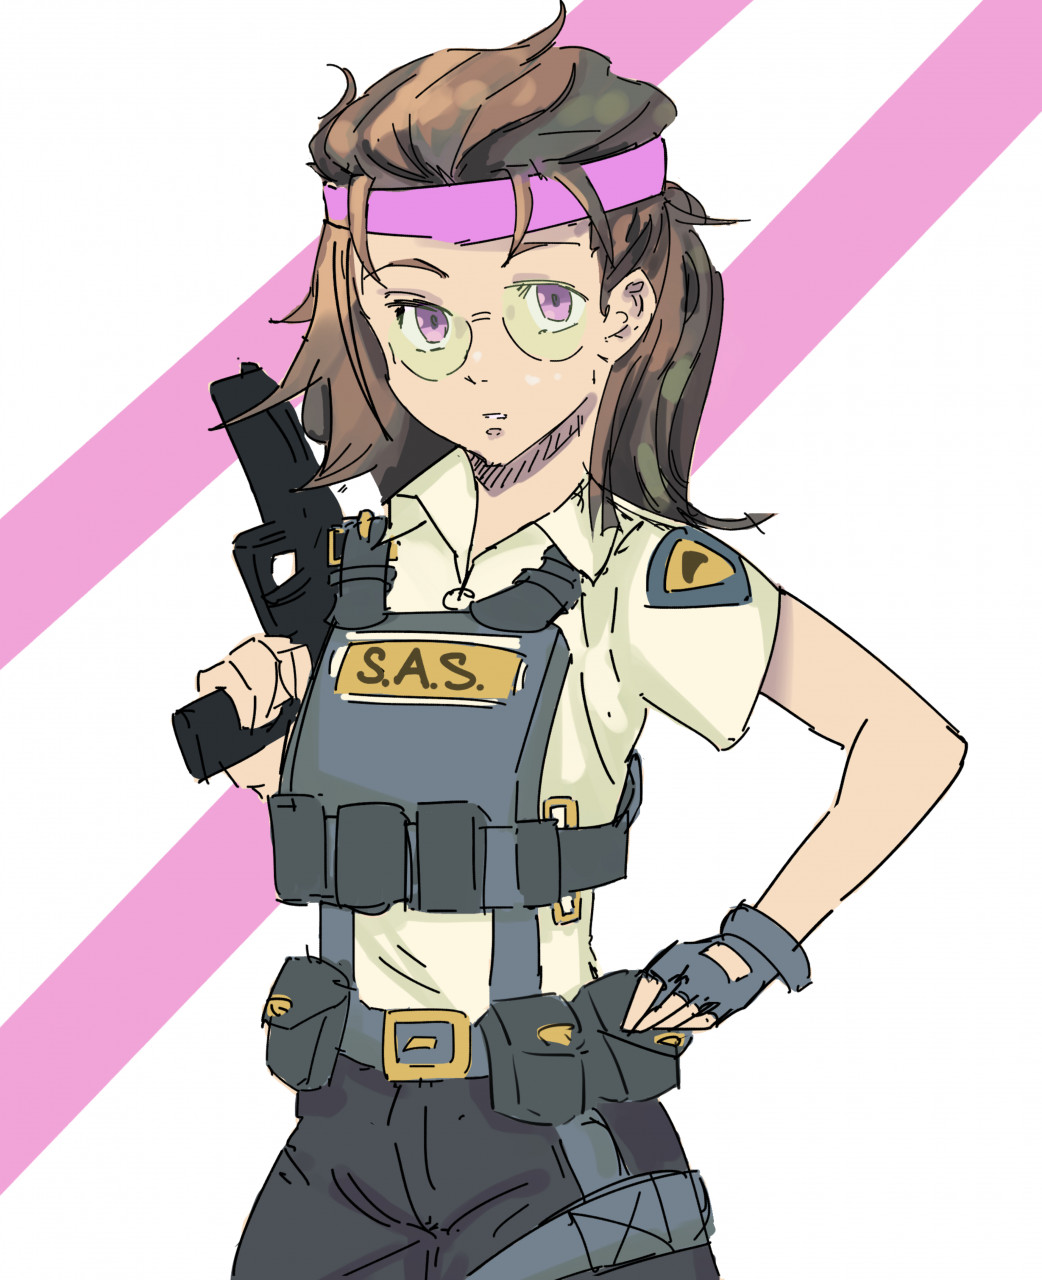 Special Force Anime Girl by UI-Design on DeviantArt